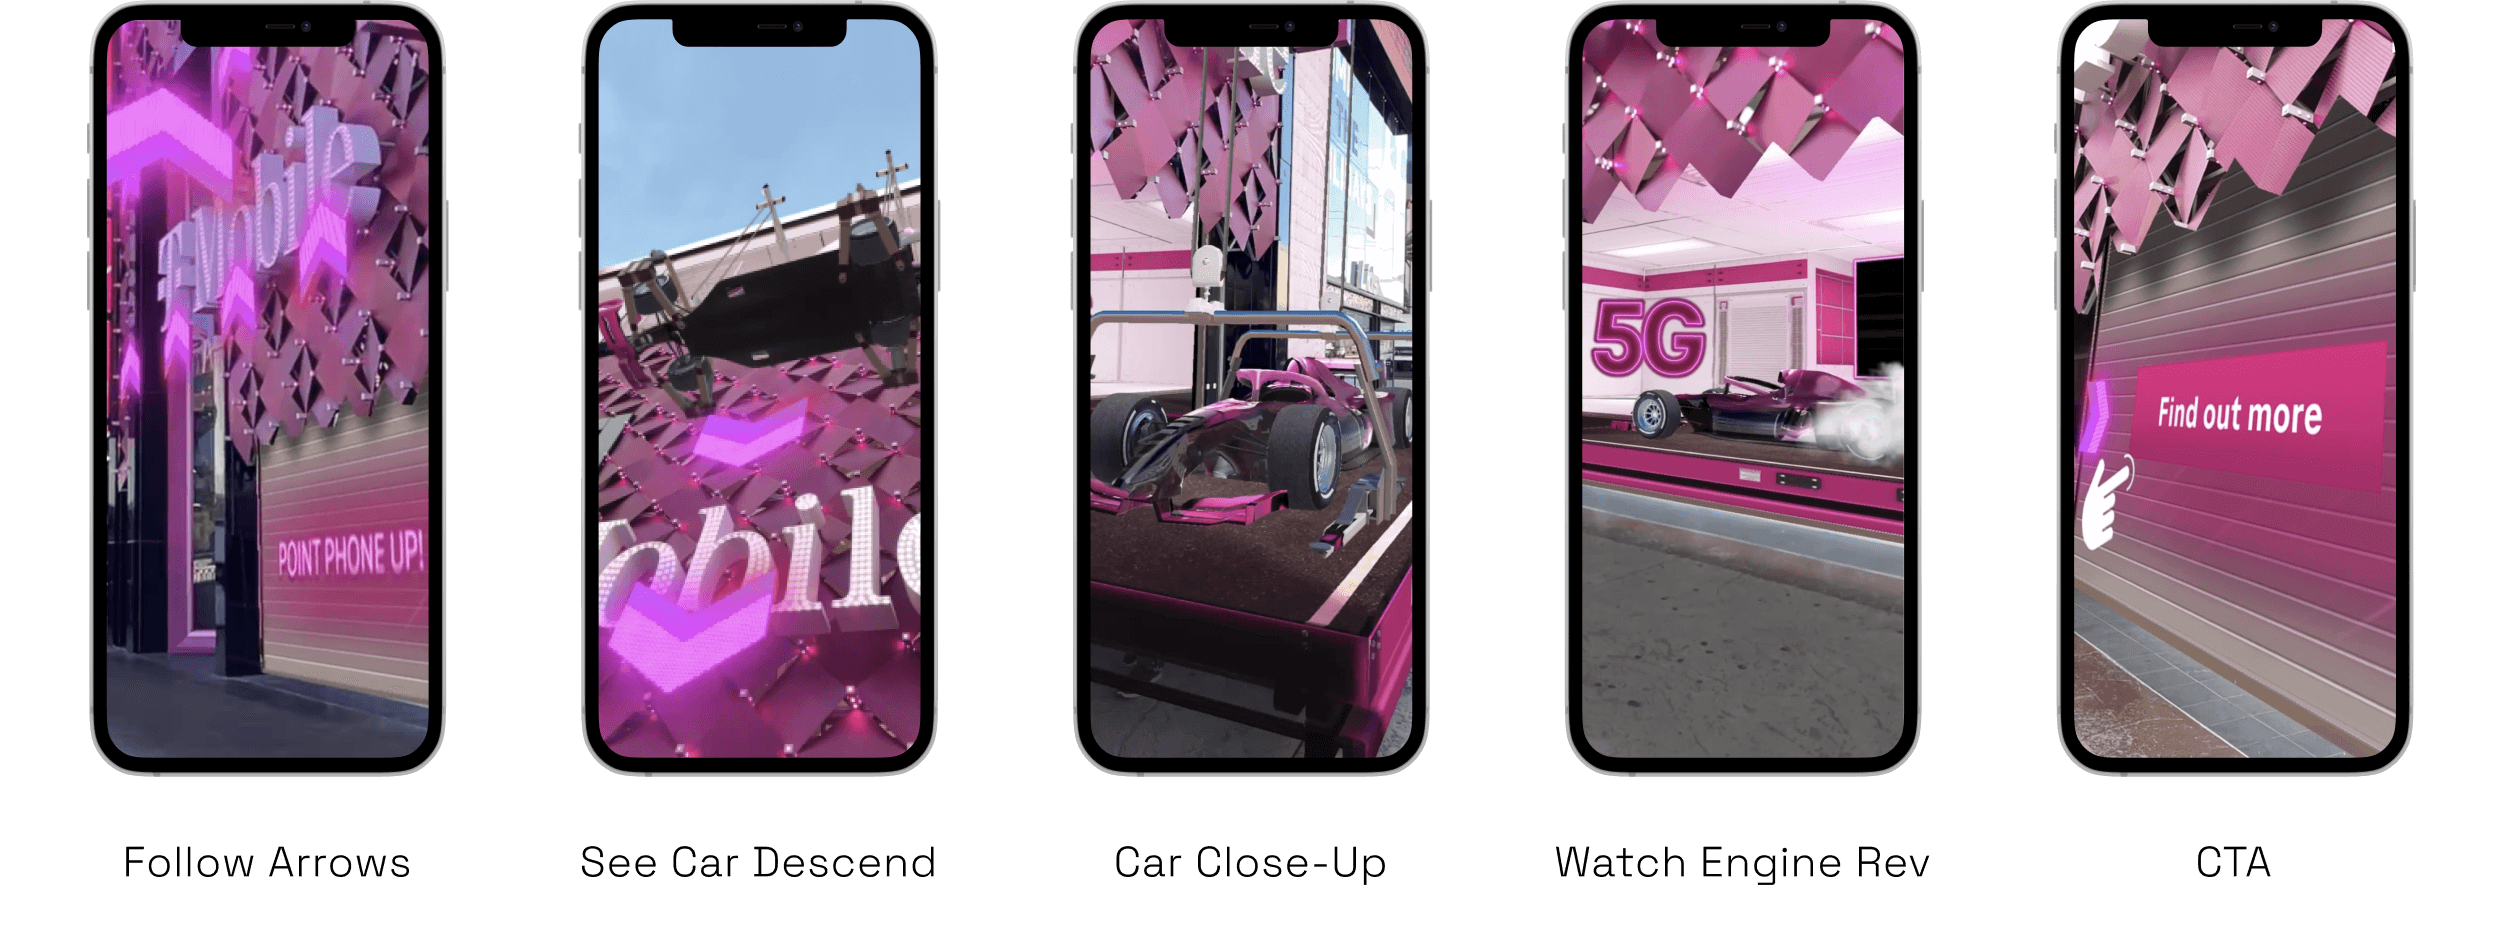 T-Mobile Storyboard